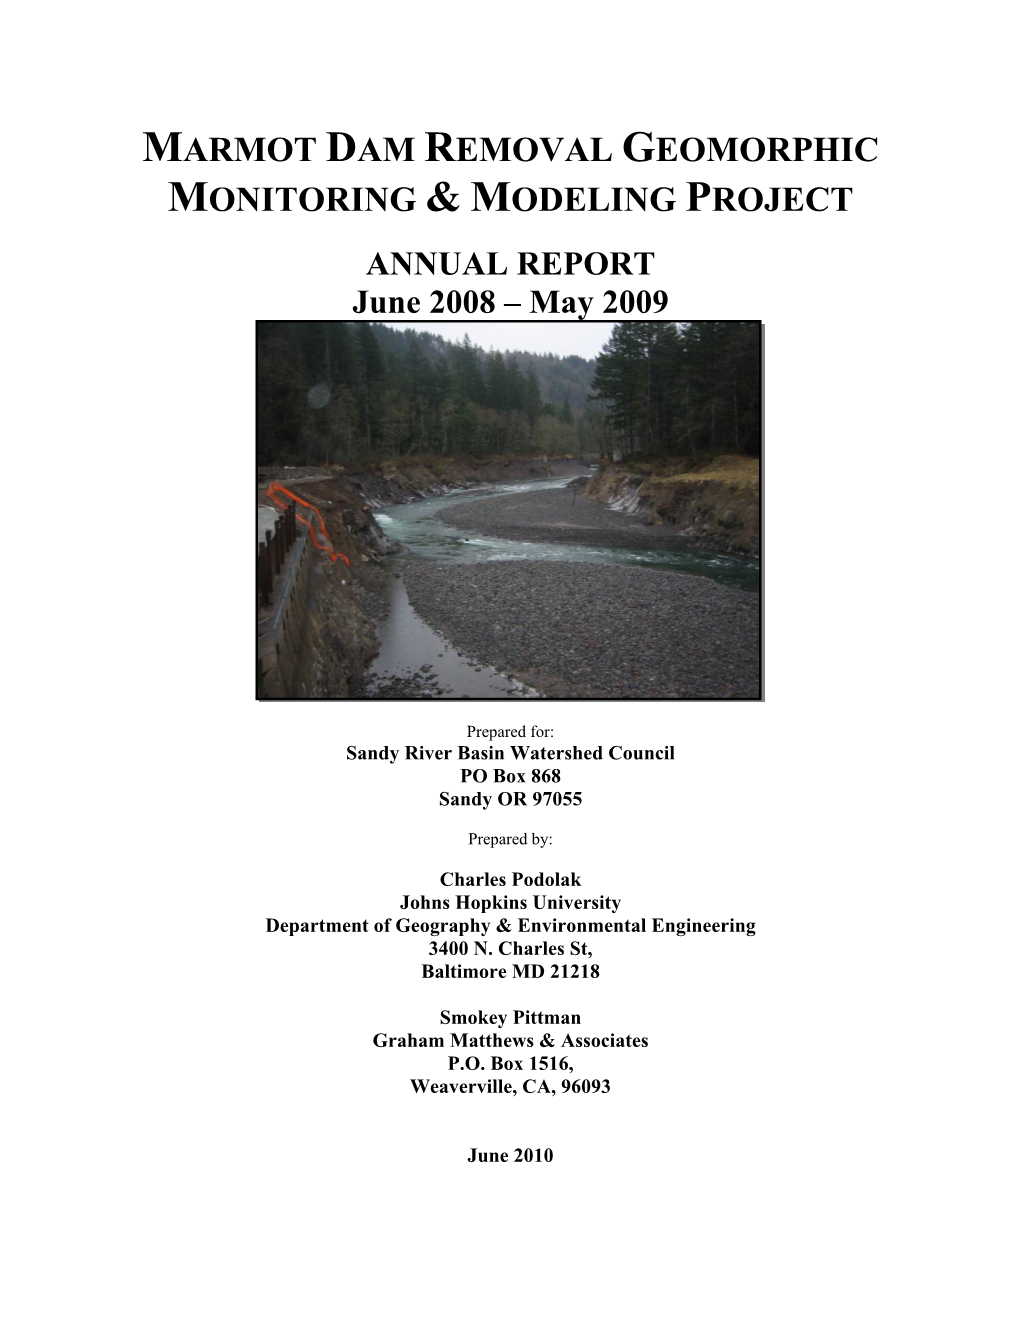 Marmot Dam Removal Geomorphic Monitoring & Modelling Project